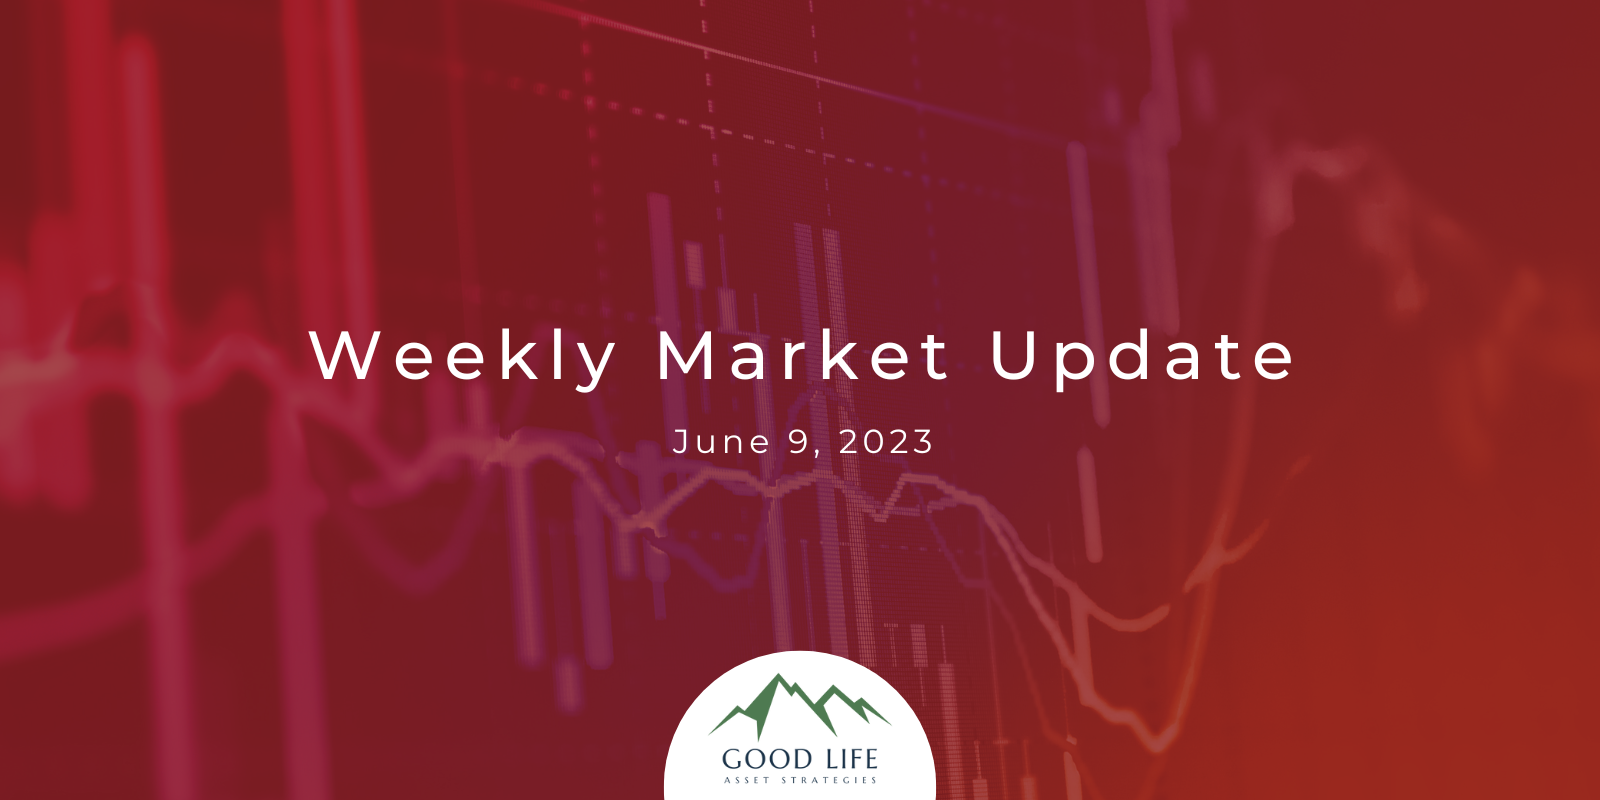 Tech stocks rally in this weekly market update from DeWayne Hall.